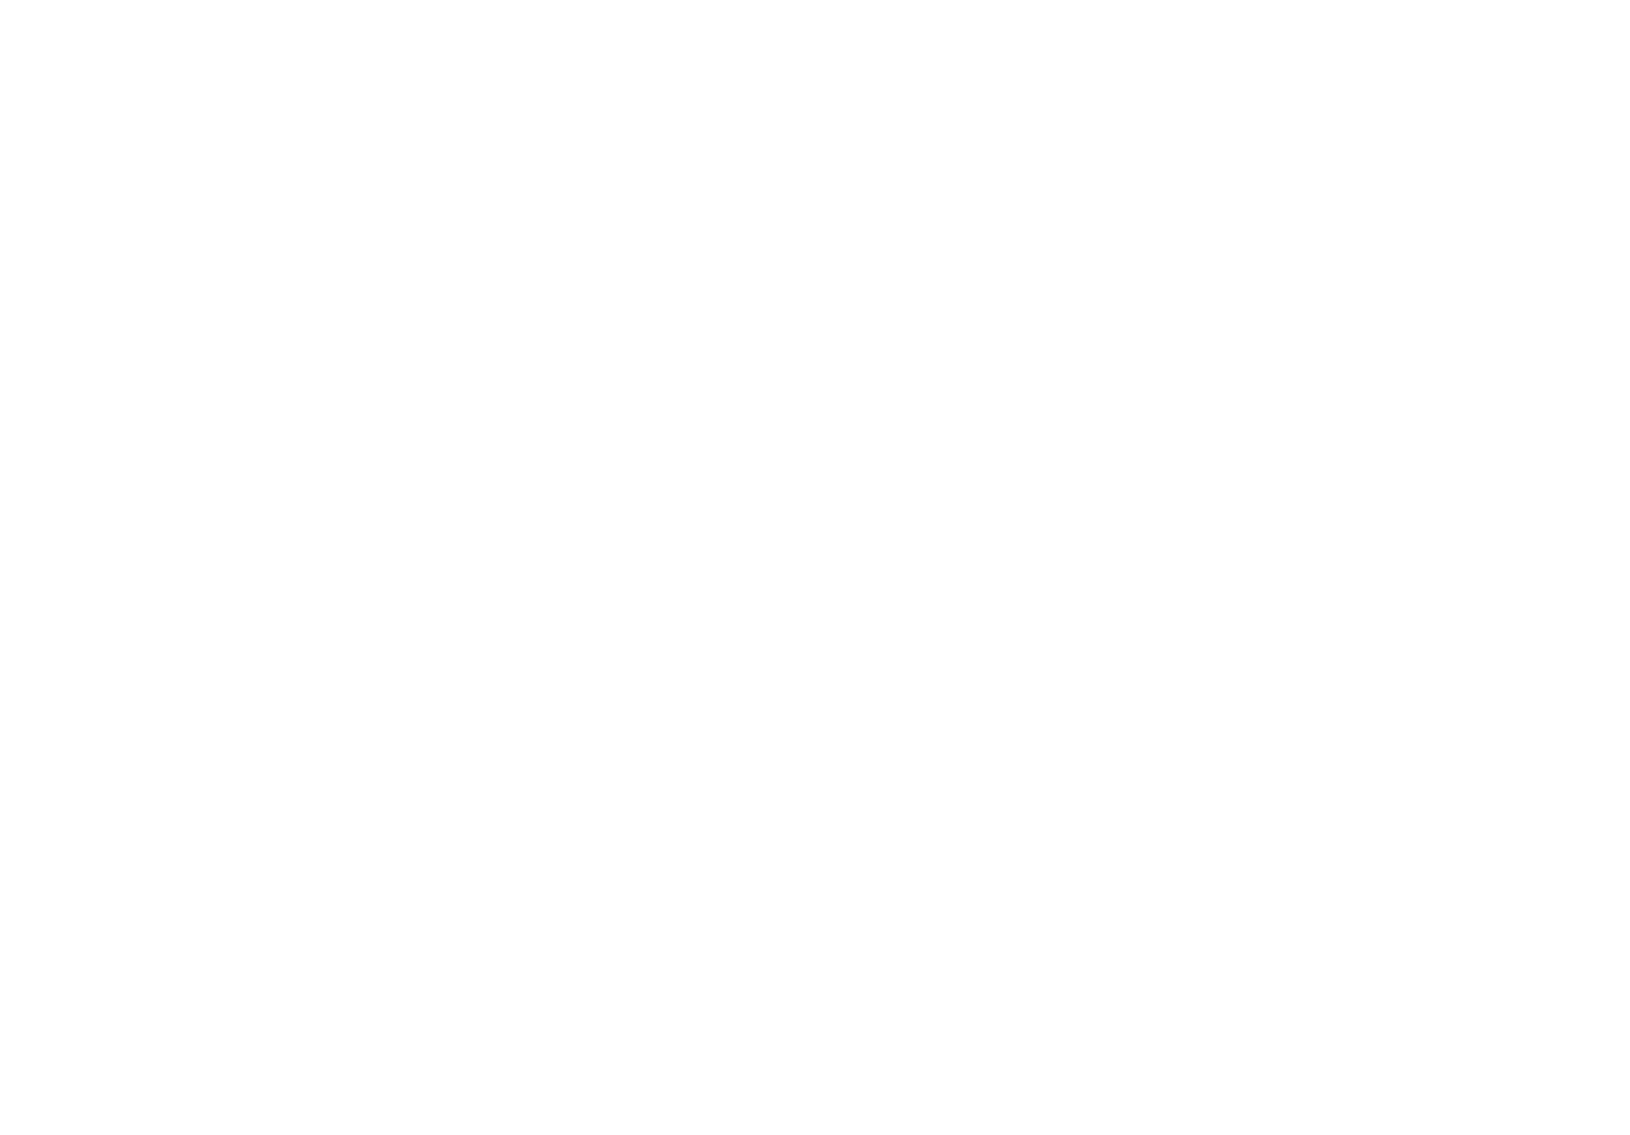 The National Association of Home Builders Logo